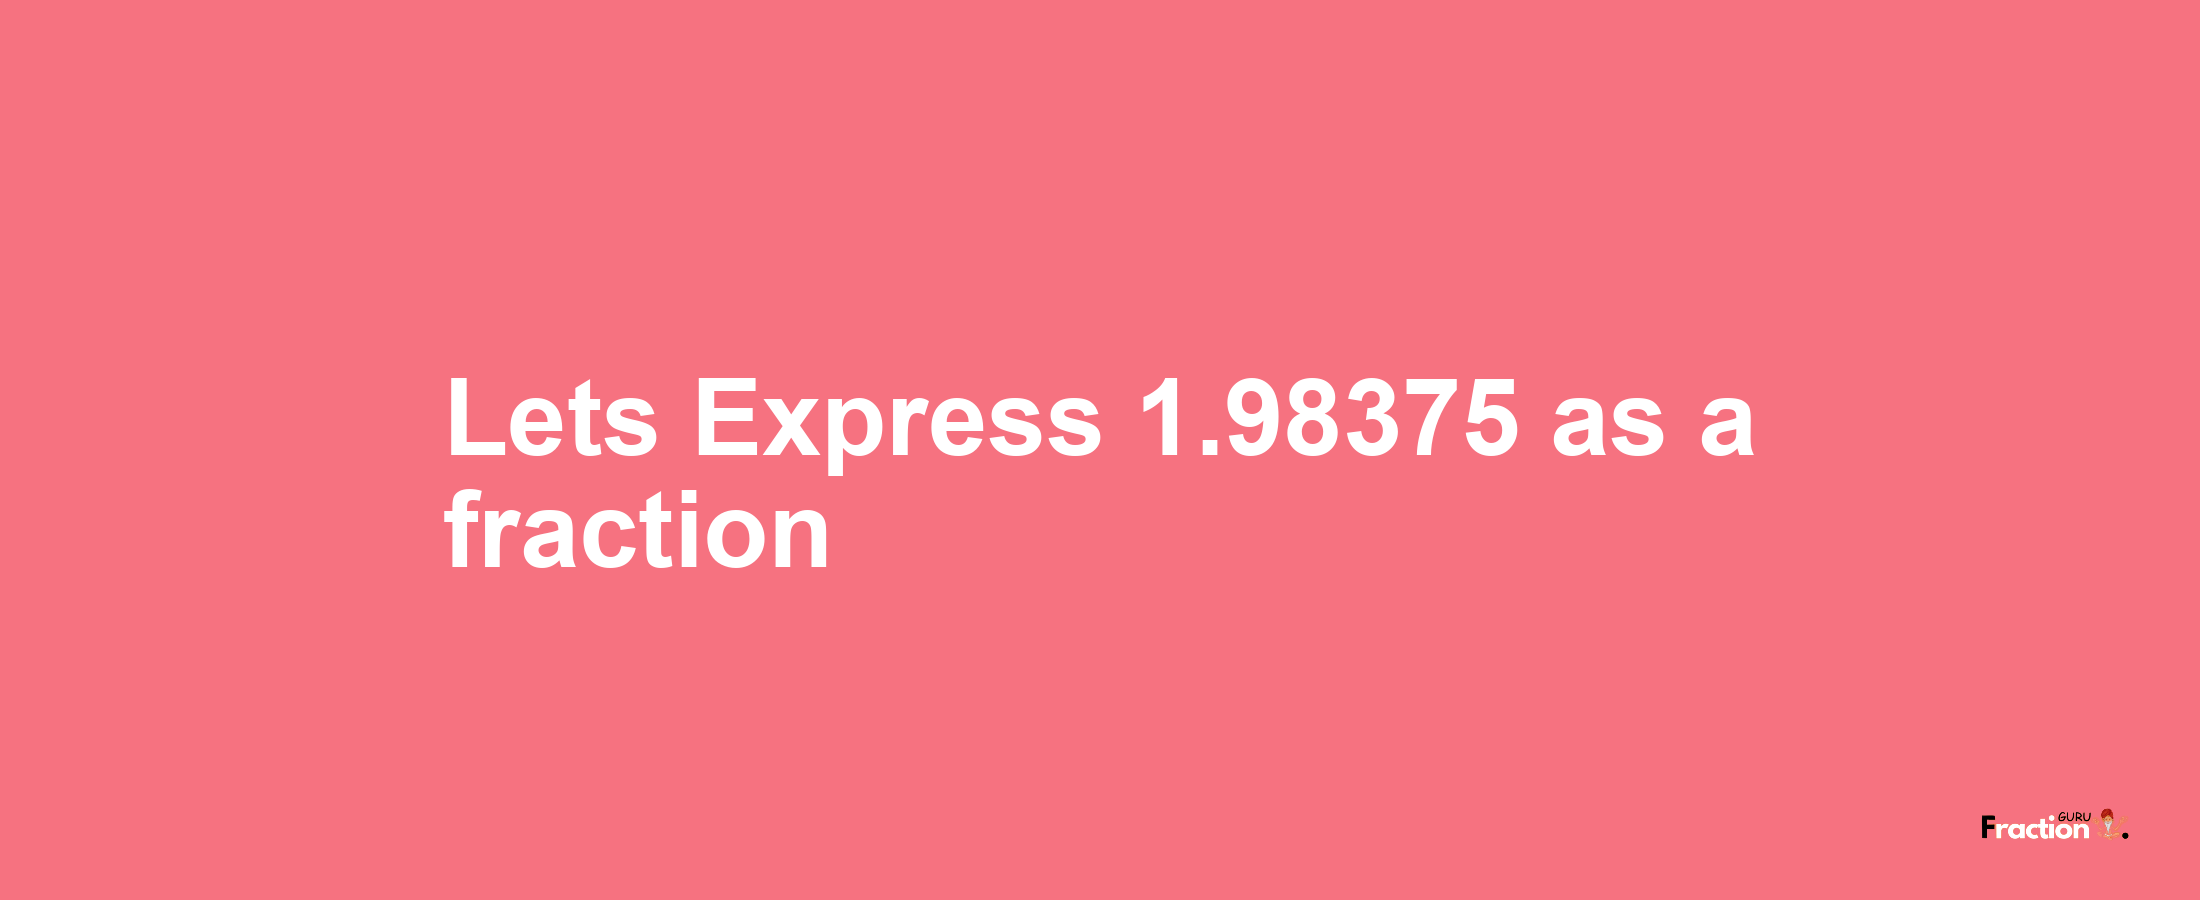 Lets Express 1.98375 as afraction